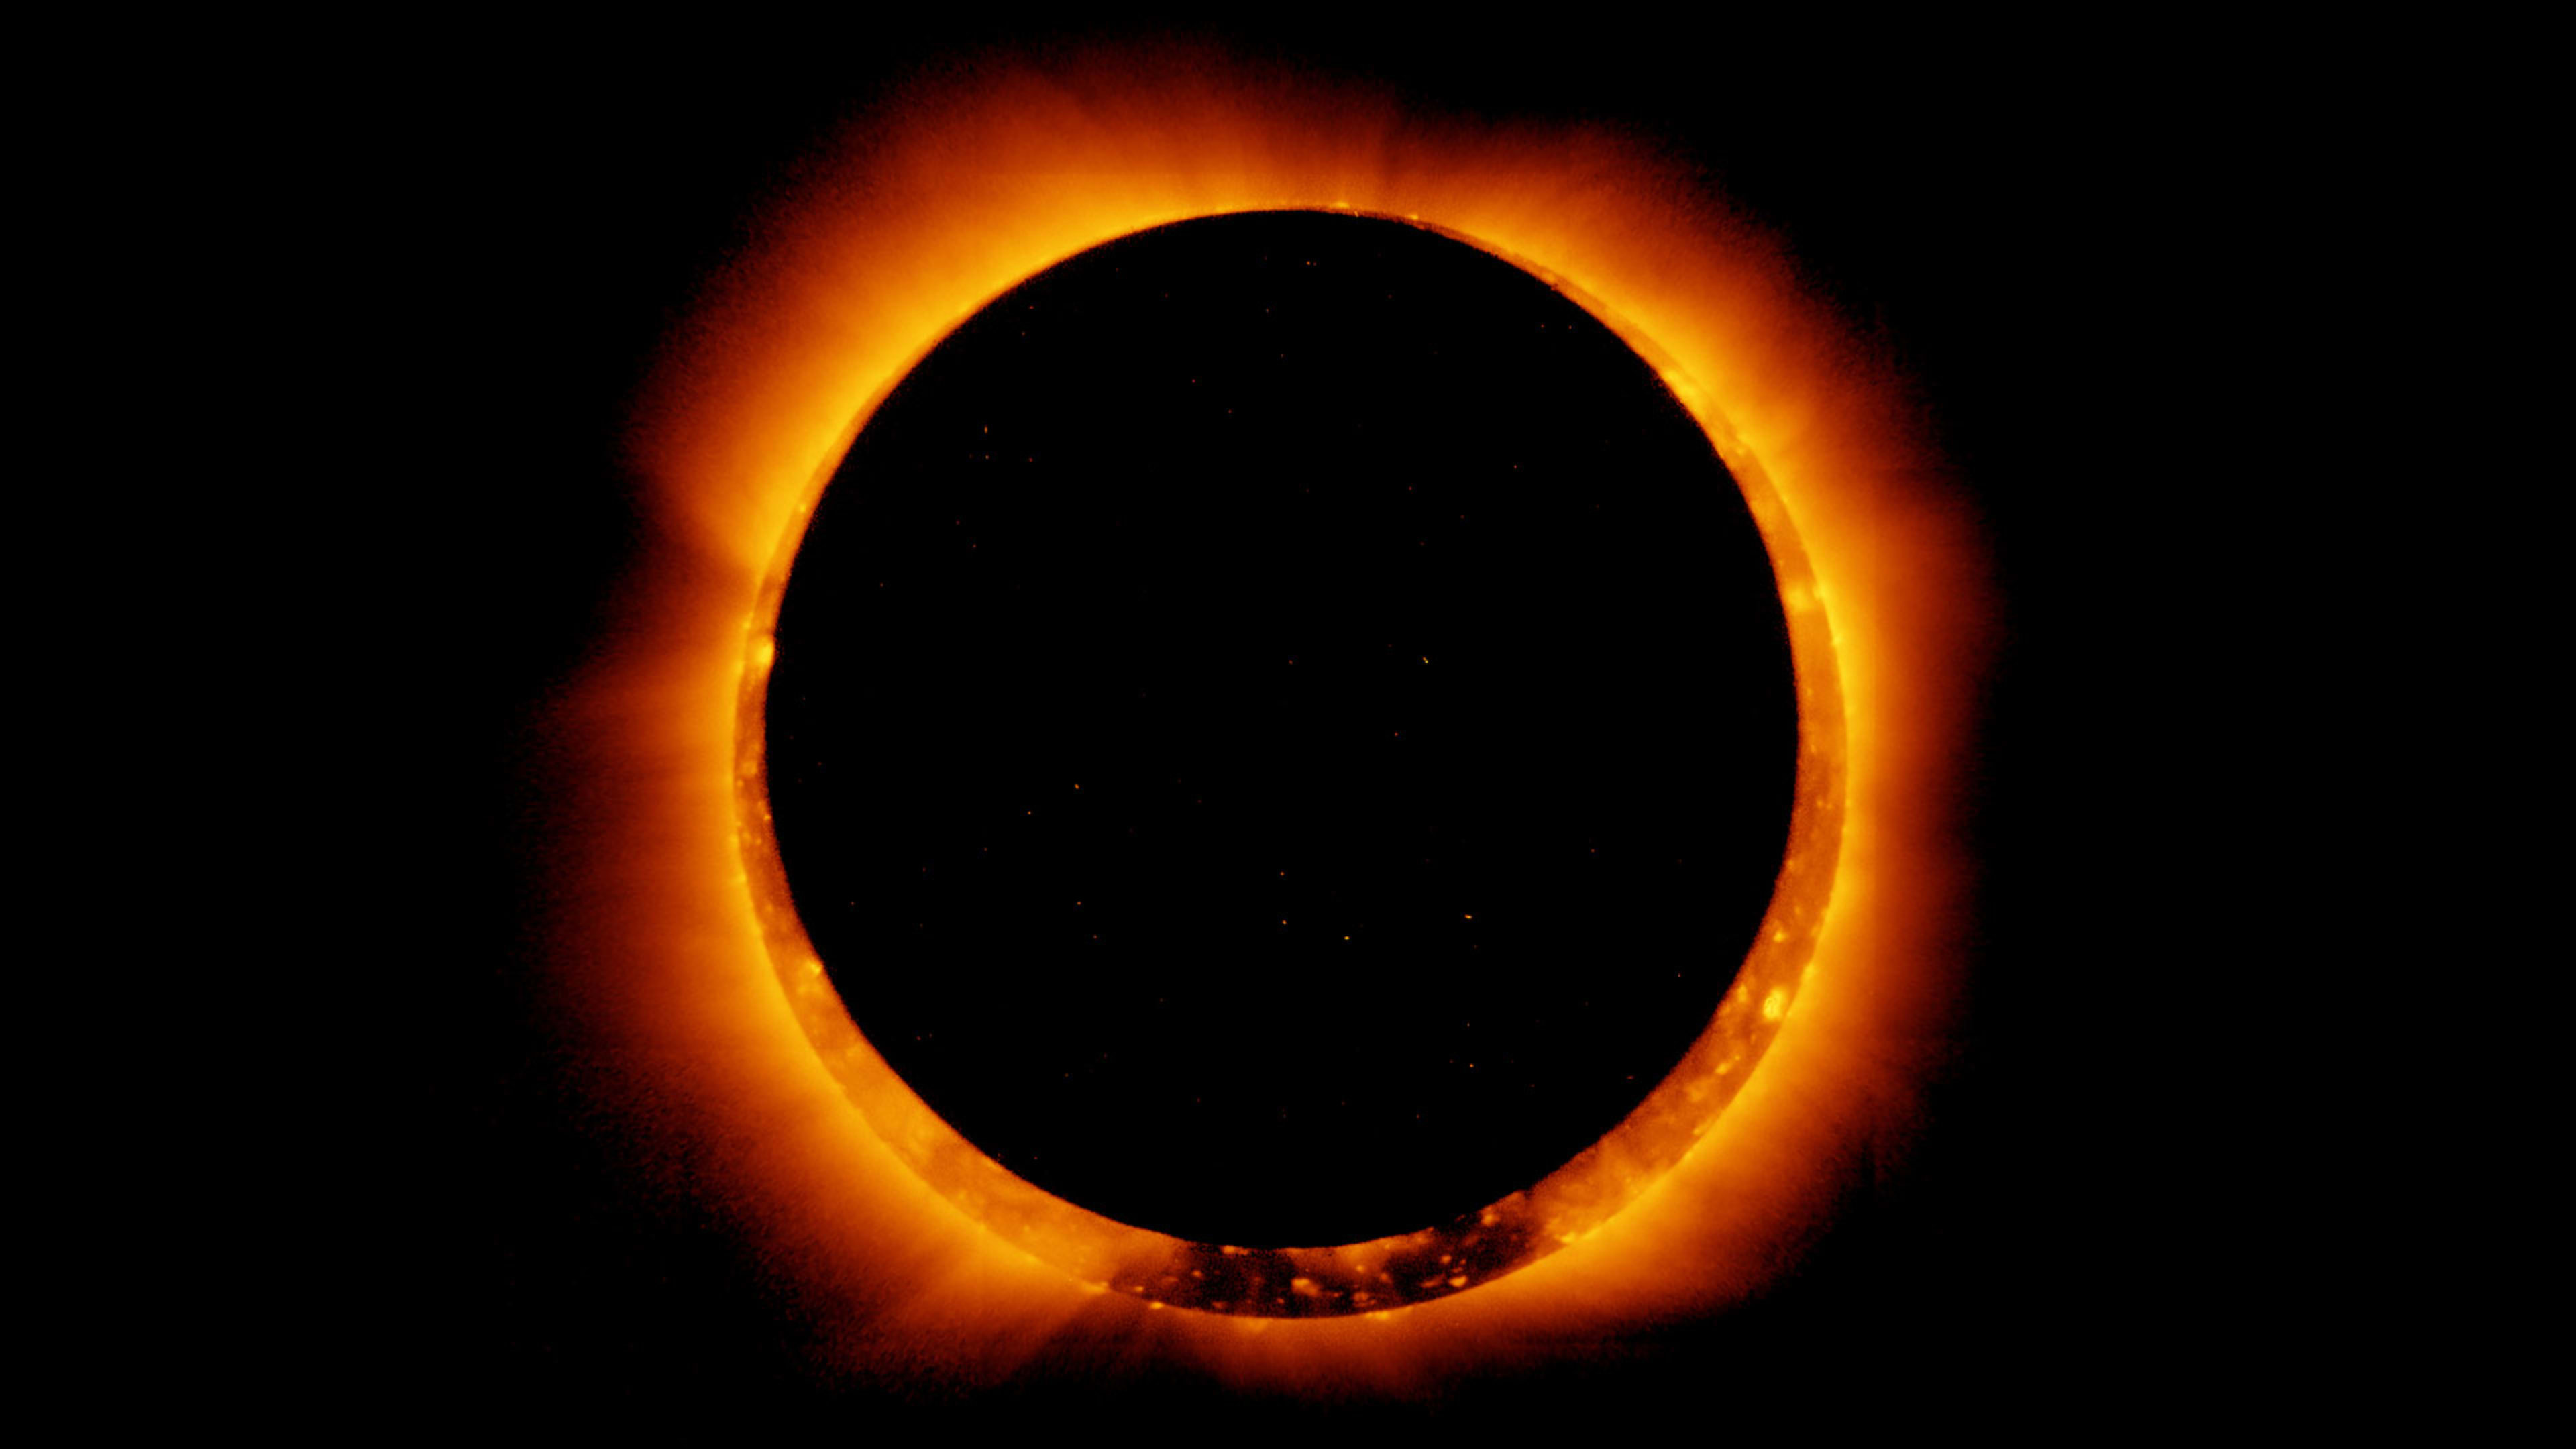 NASA answered all your burning solar eclipse questions on Reddit—here are the best quotes